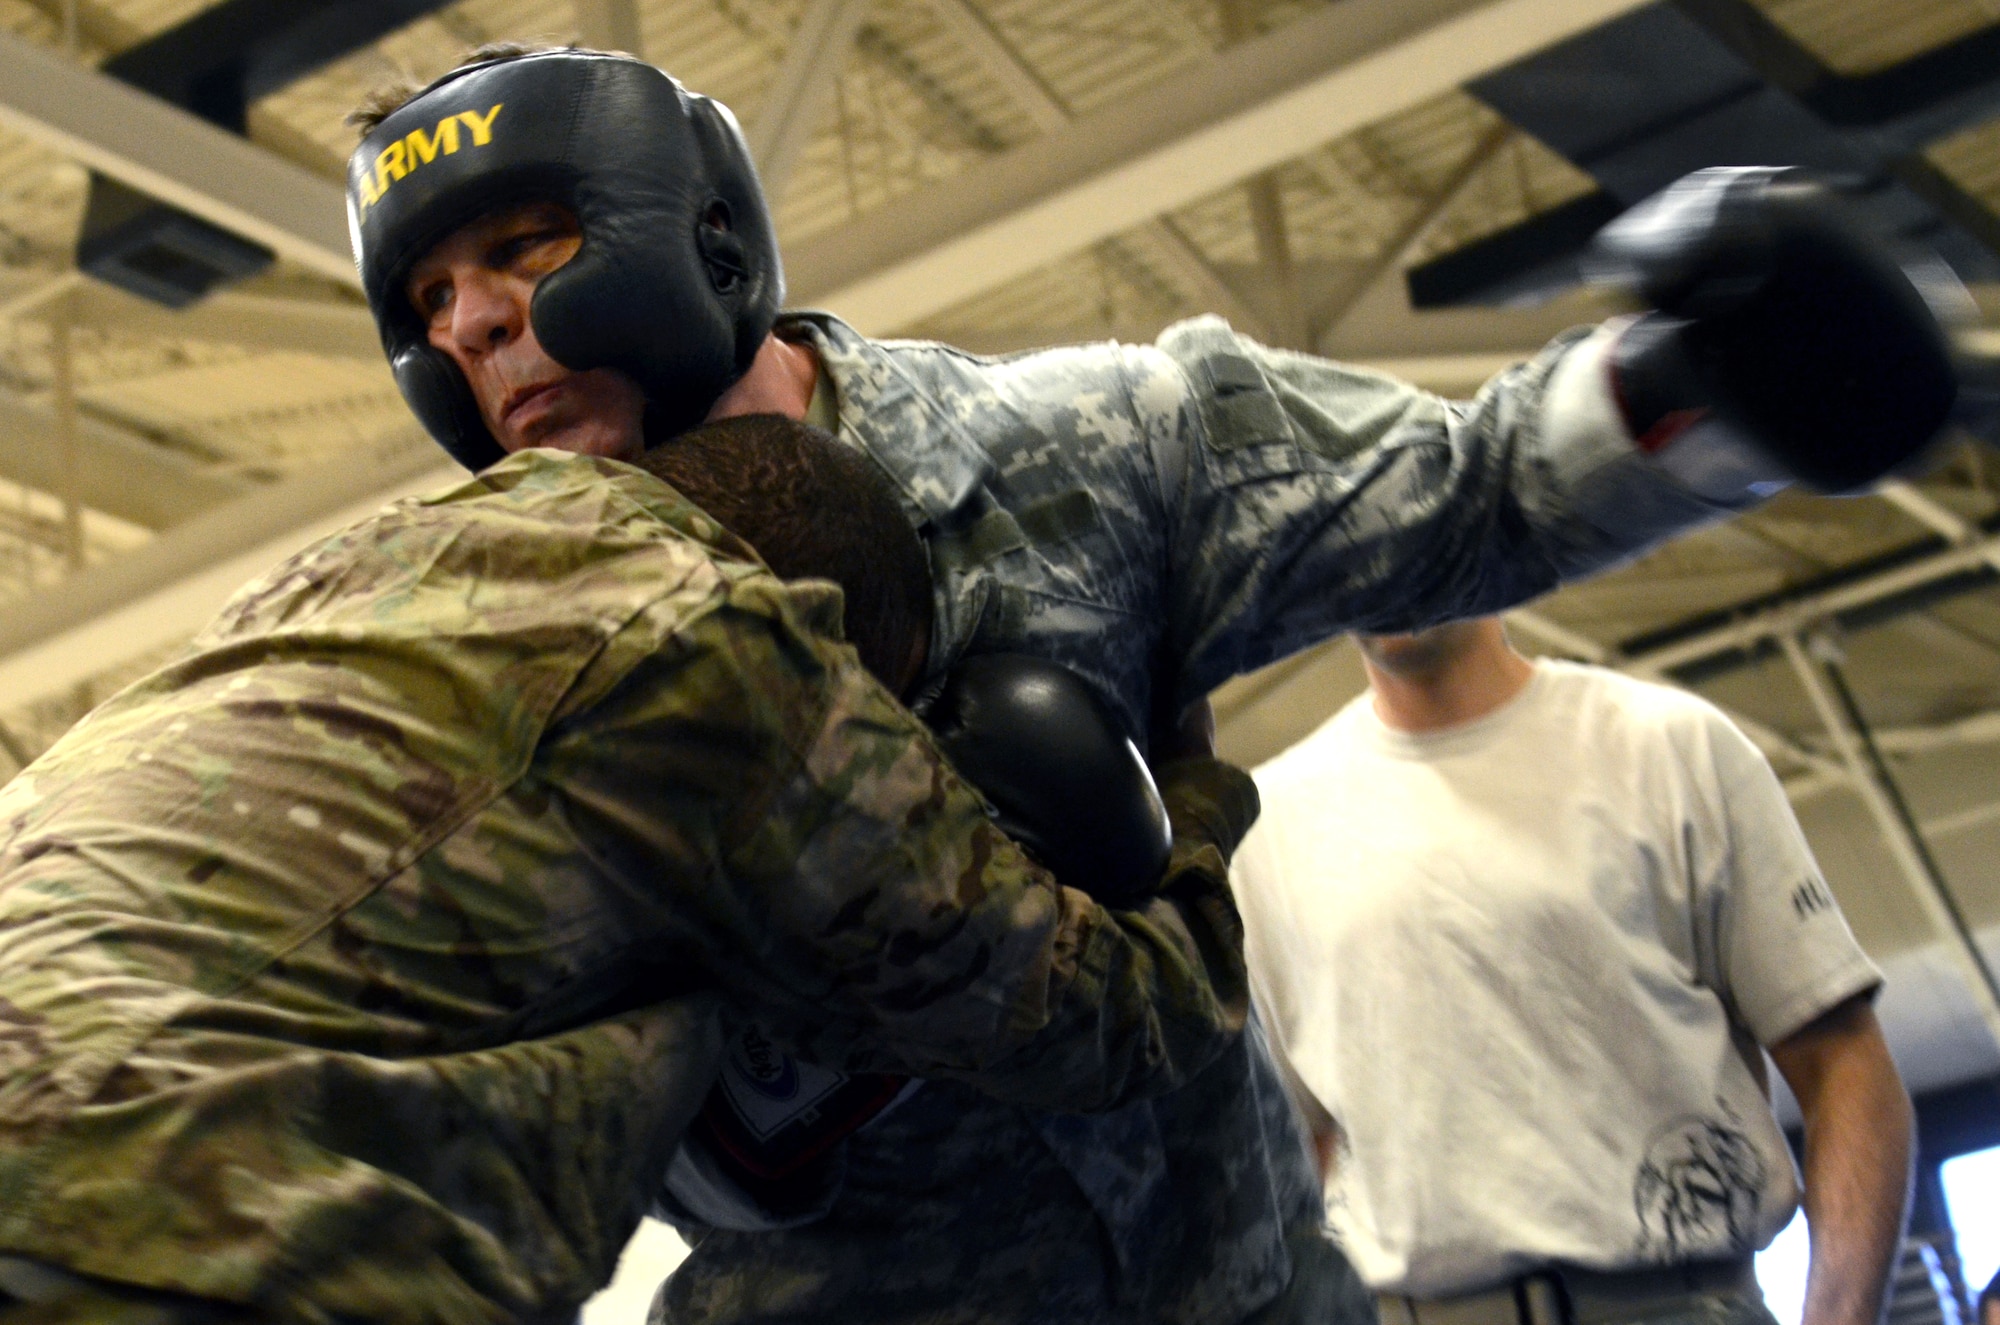 Maj. Daniel Lloyd, a Modern Army Combatives Program (MACP) Basic Combatives Course Level 1 Instructor assigned to the 1st Battlefield Coordination Detachment, hits a student during the Modern Army Combatives Program (MACP) Basic Combatives Course Level 1 at the Benko Fitness Center on Davis-Monthan AFB, Ariz., Jan. 13, 2014. MACP is a 40-hour course that focuses on three phases of basic fight strategy; close the distance, gain the dominate position, and how to finish the fight. (U.S. Air Force photo by Staff Sgt. Heather R. Redman/Released) 
